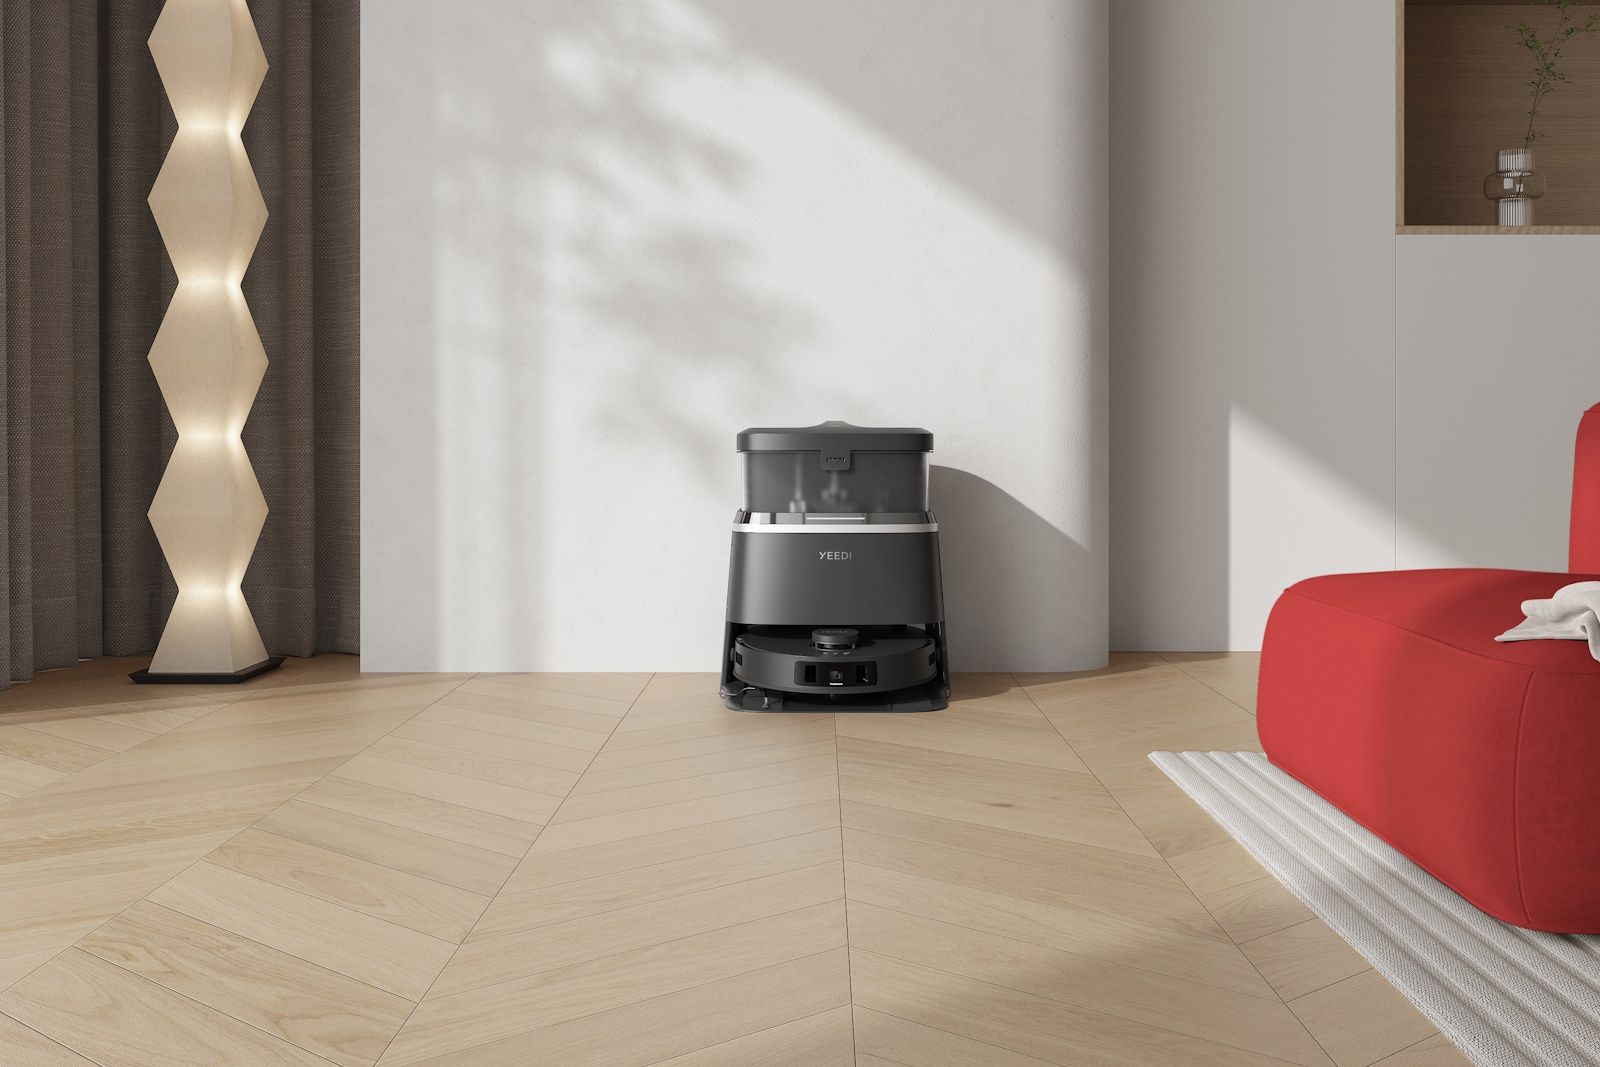 Yeedi has just announced an incredible new vacuum and mop